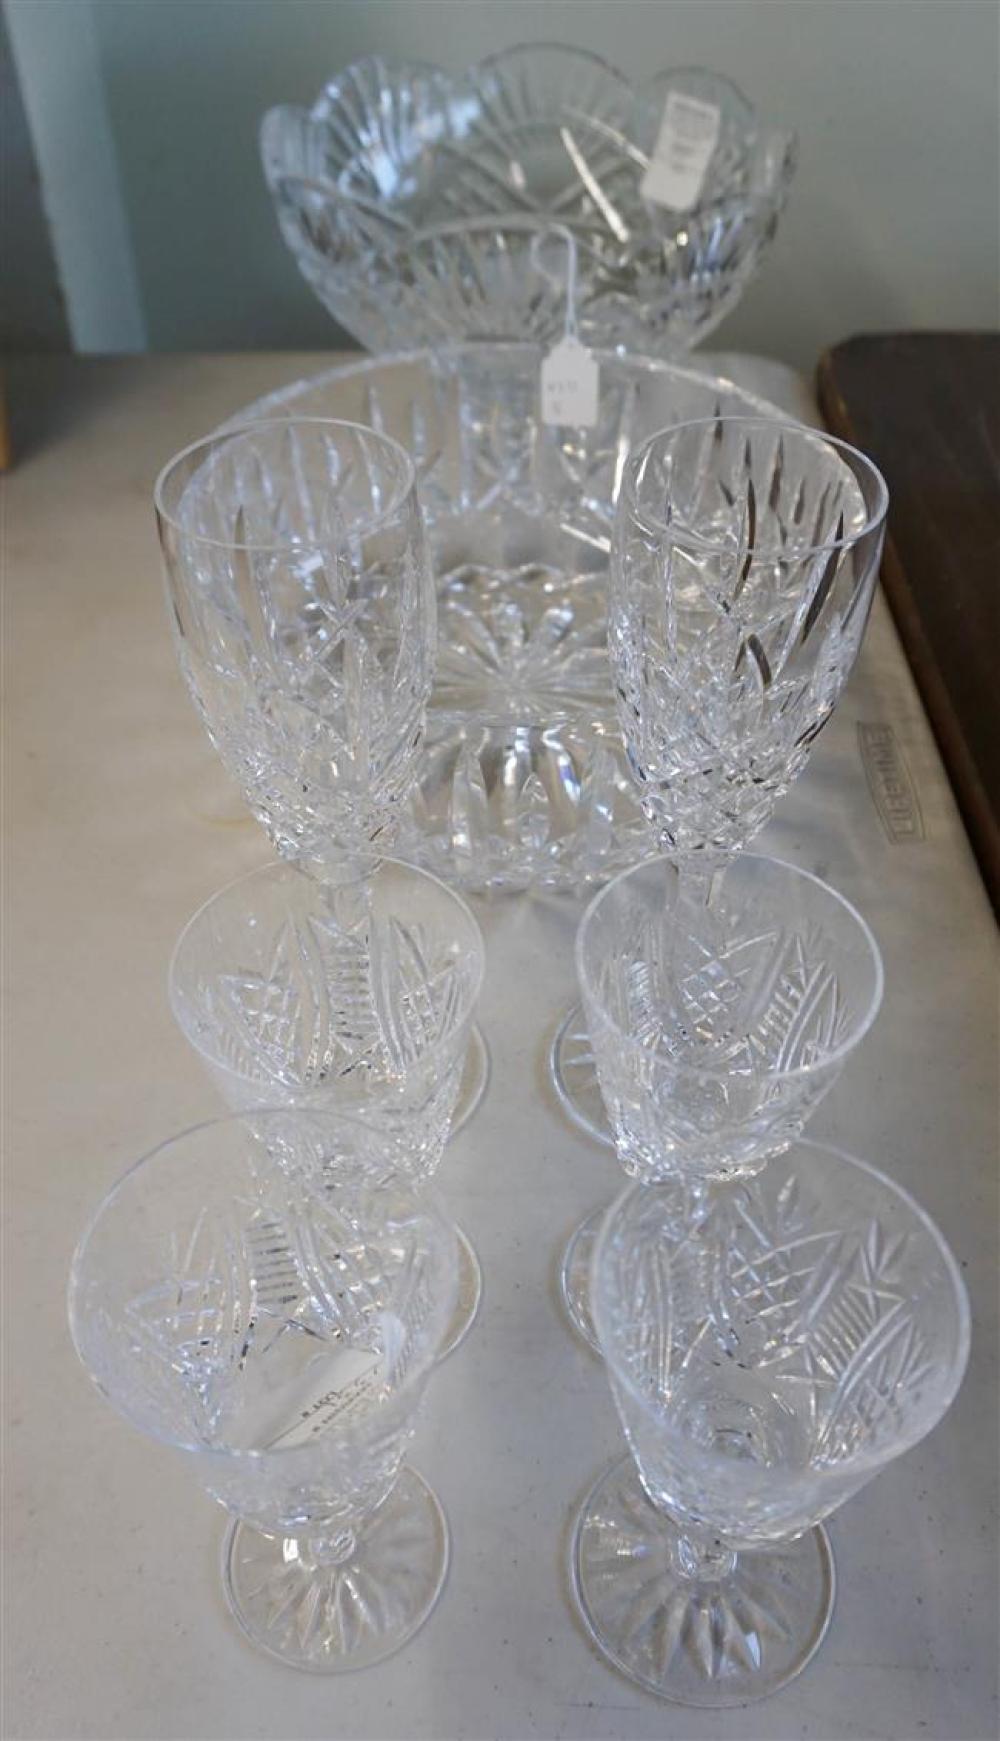 TWO WATERFORD CRYSTAL BOWLS PAIR 321e8f